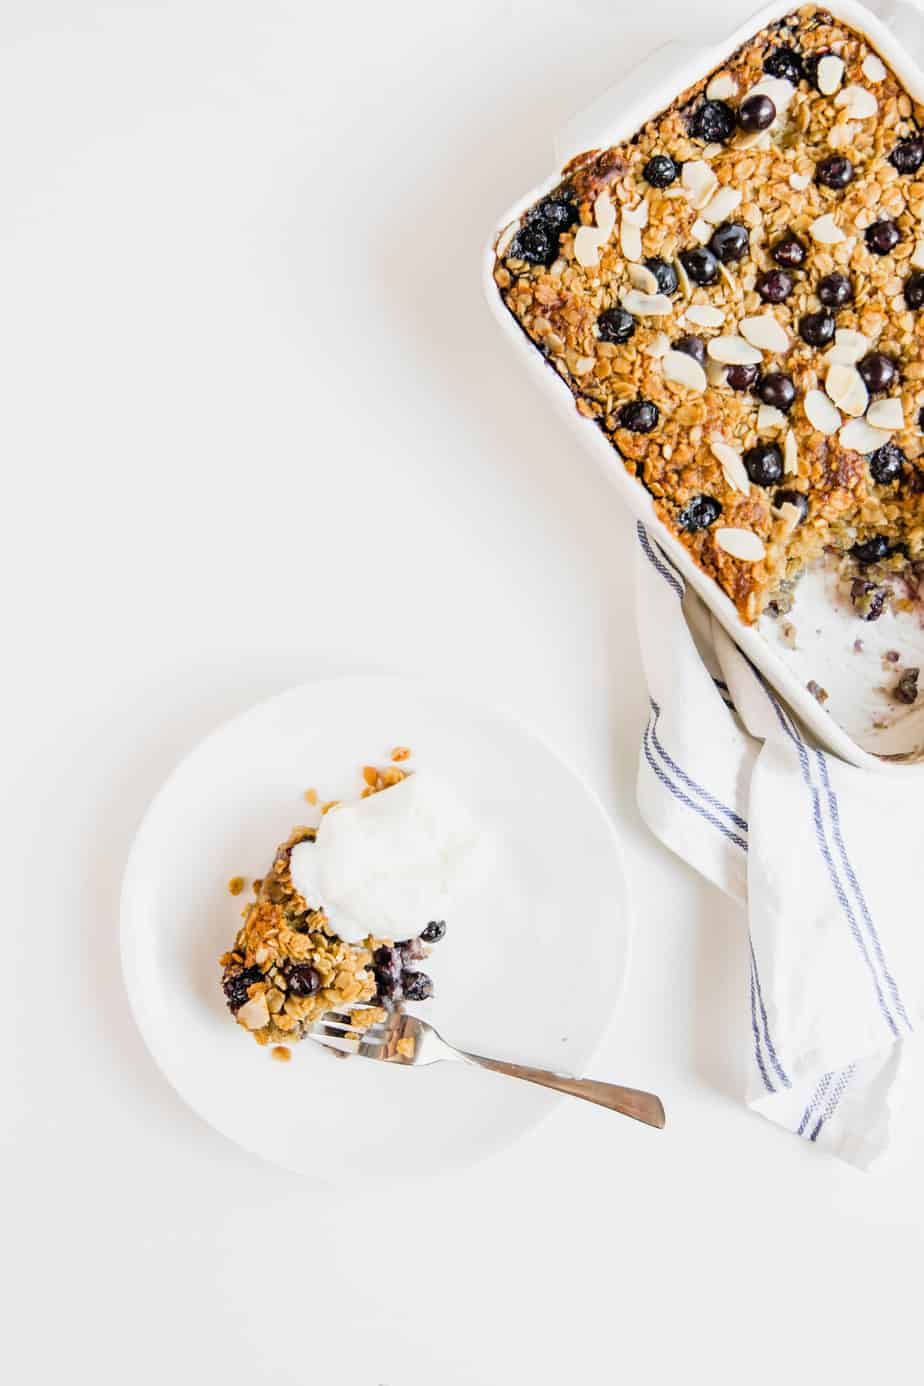 Blueberry Baked Oatmeal served in a bowl with a silver fork.